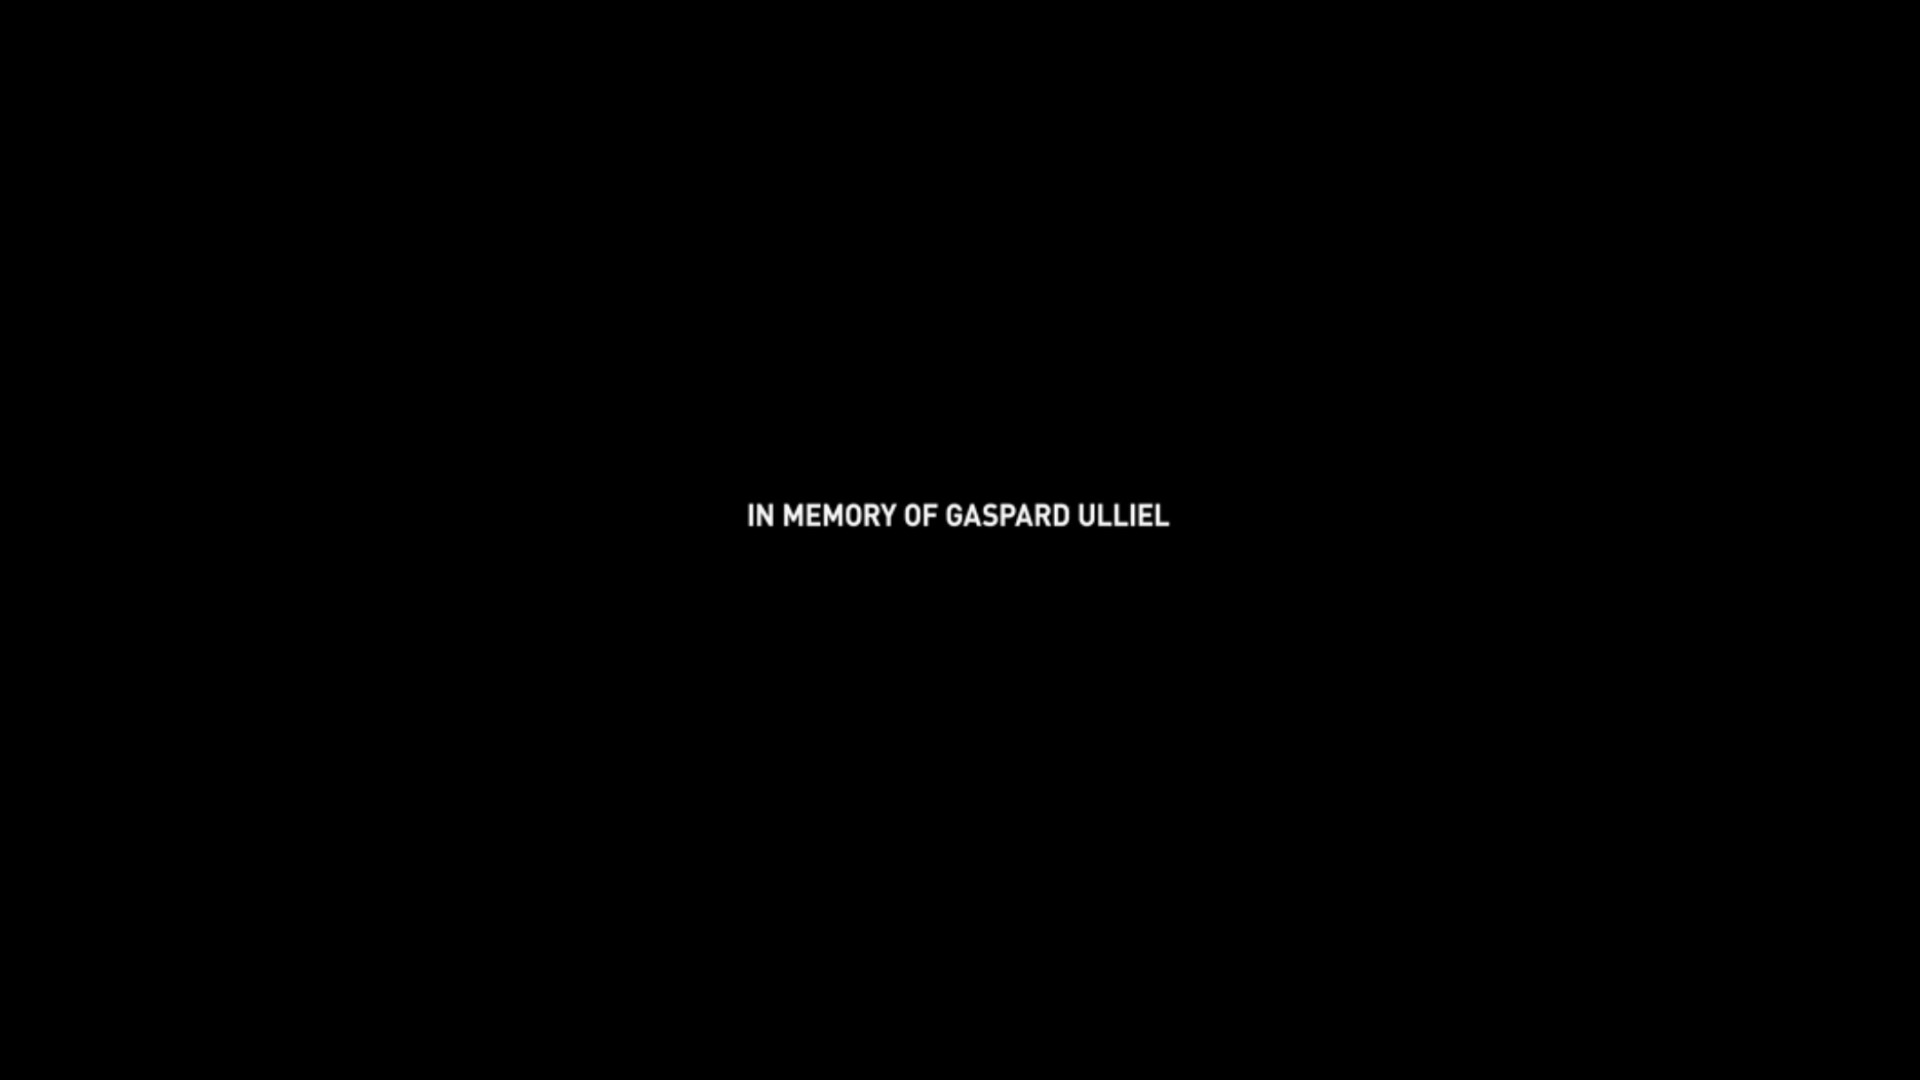 Credits of episode 3 of Moon Knight: In memory of Gaspard Ulliel